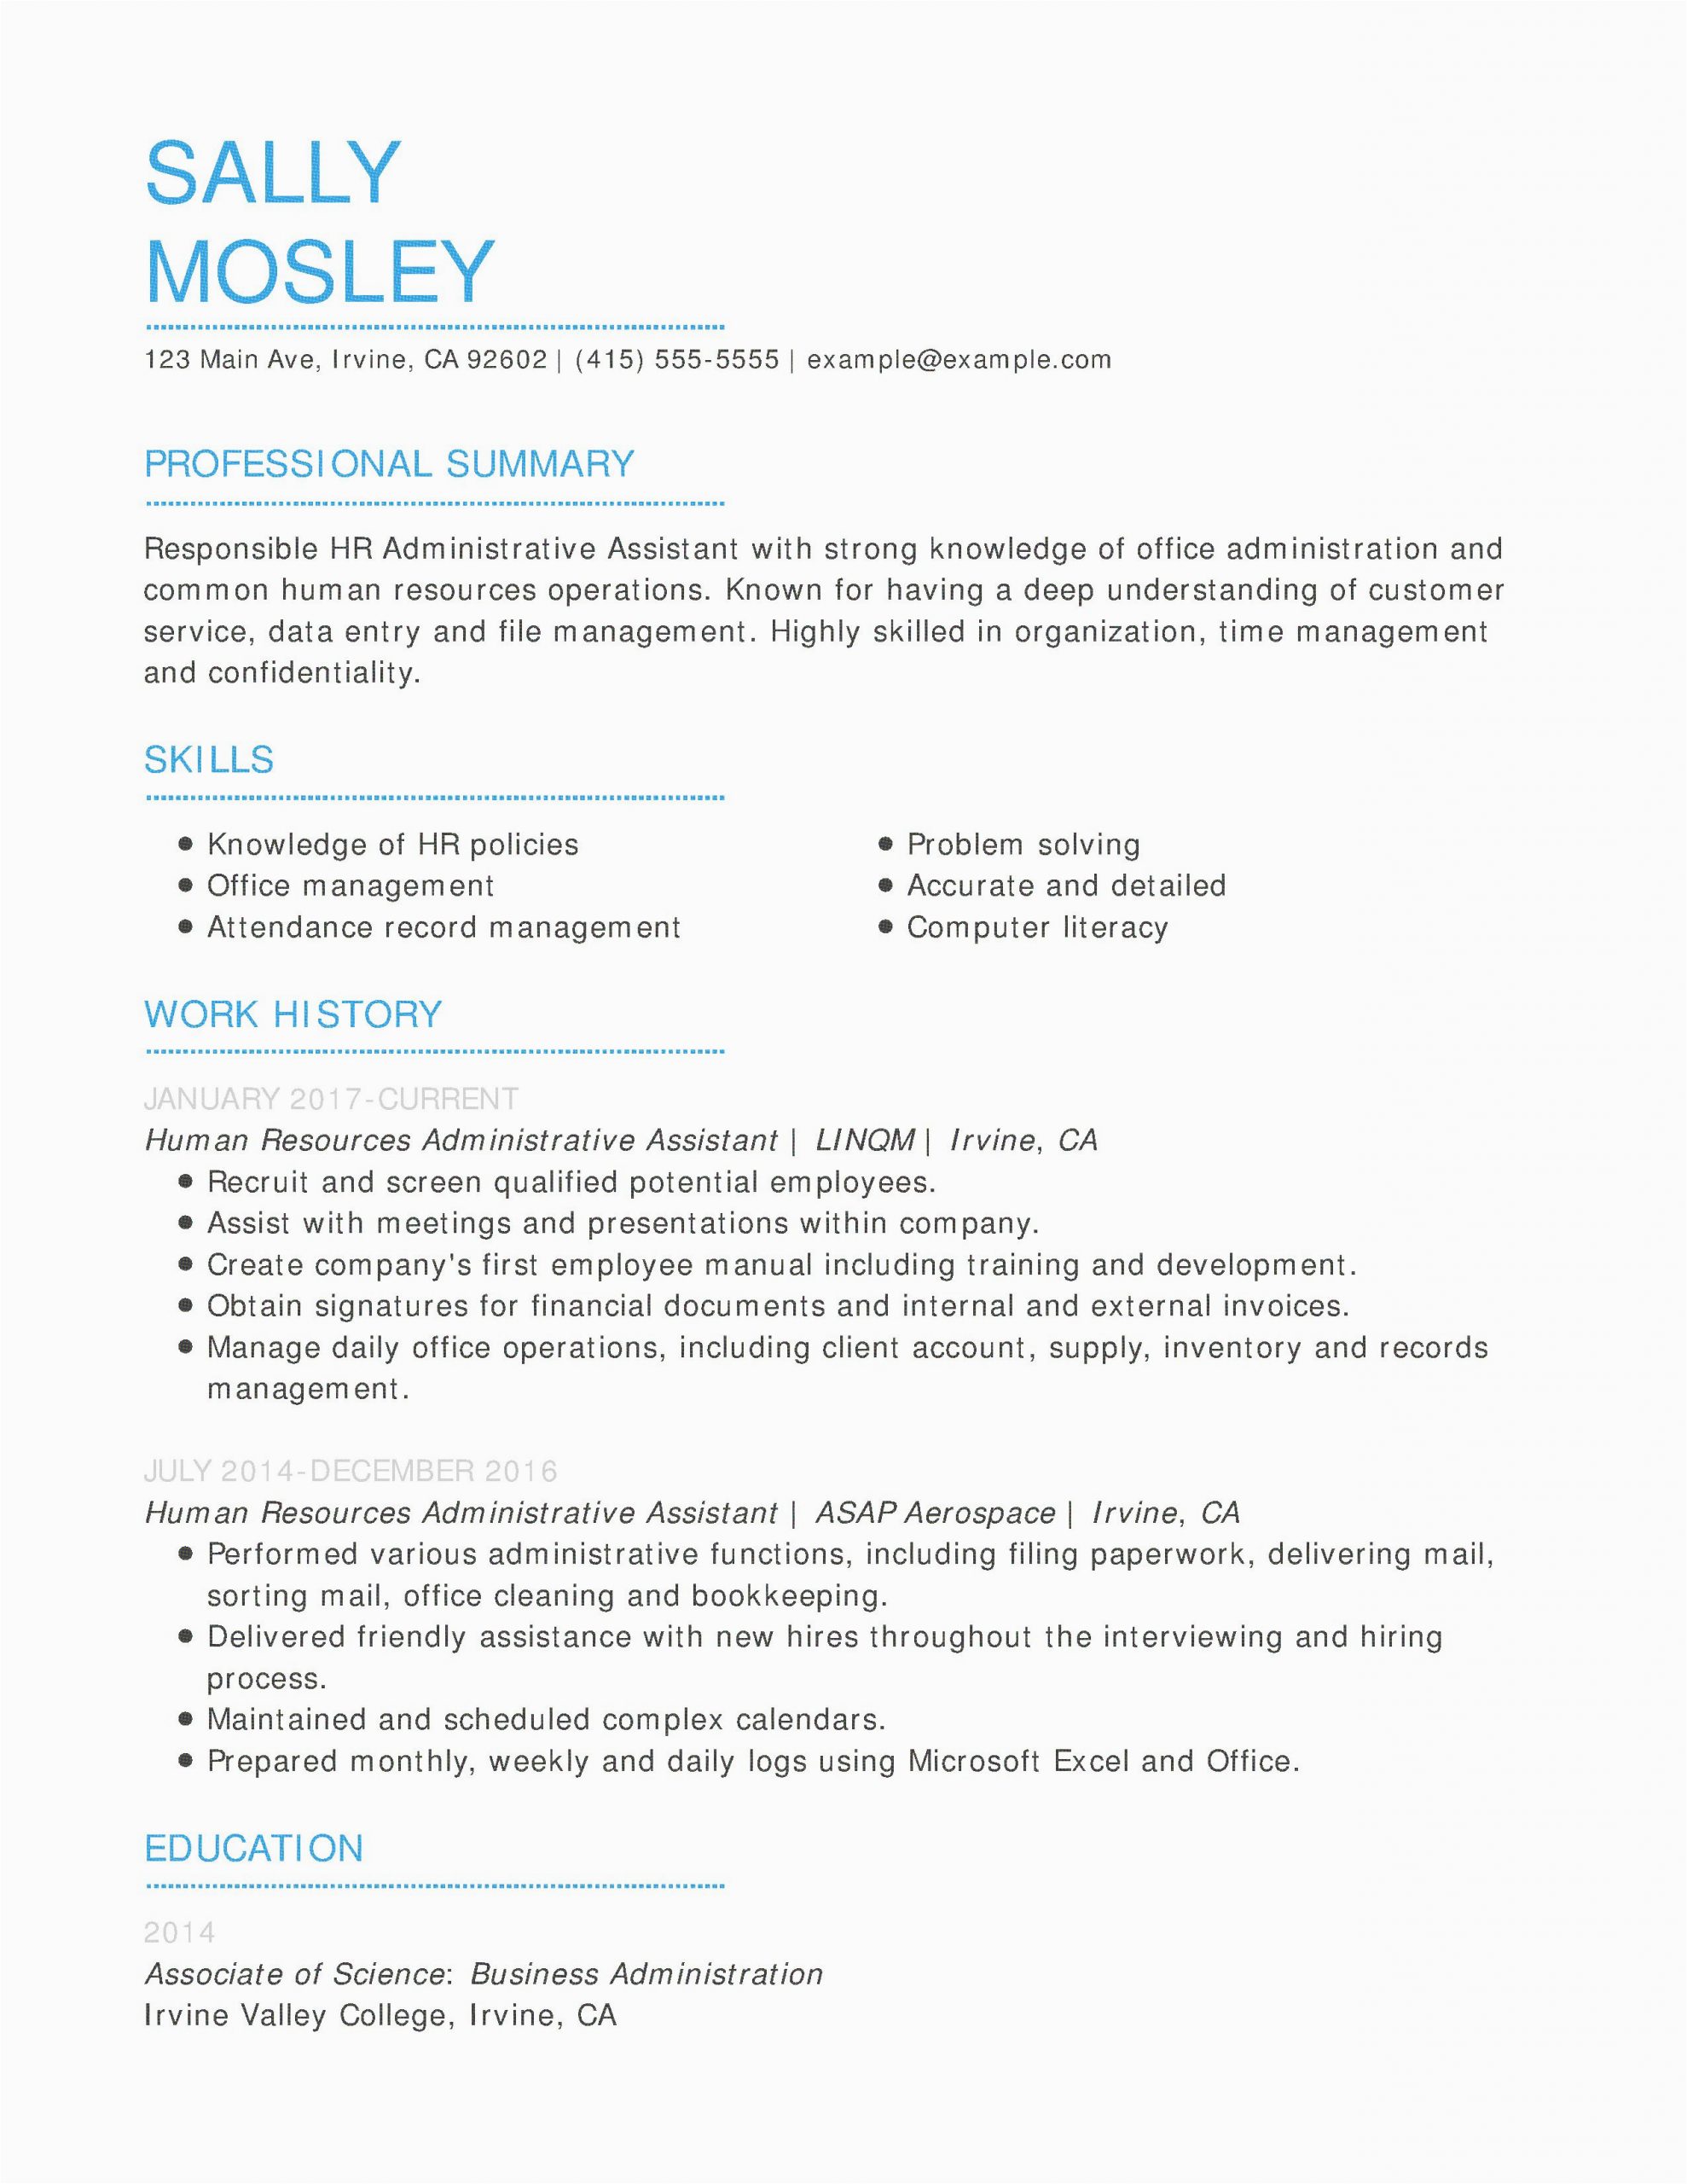 Human Resources Sample Resume Entry Level Entry Level Human Resource Resume – Karoosha